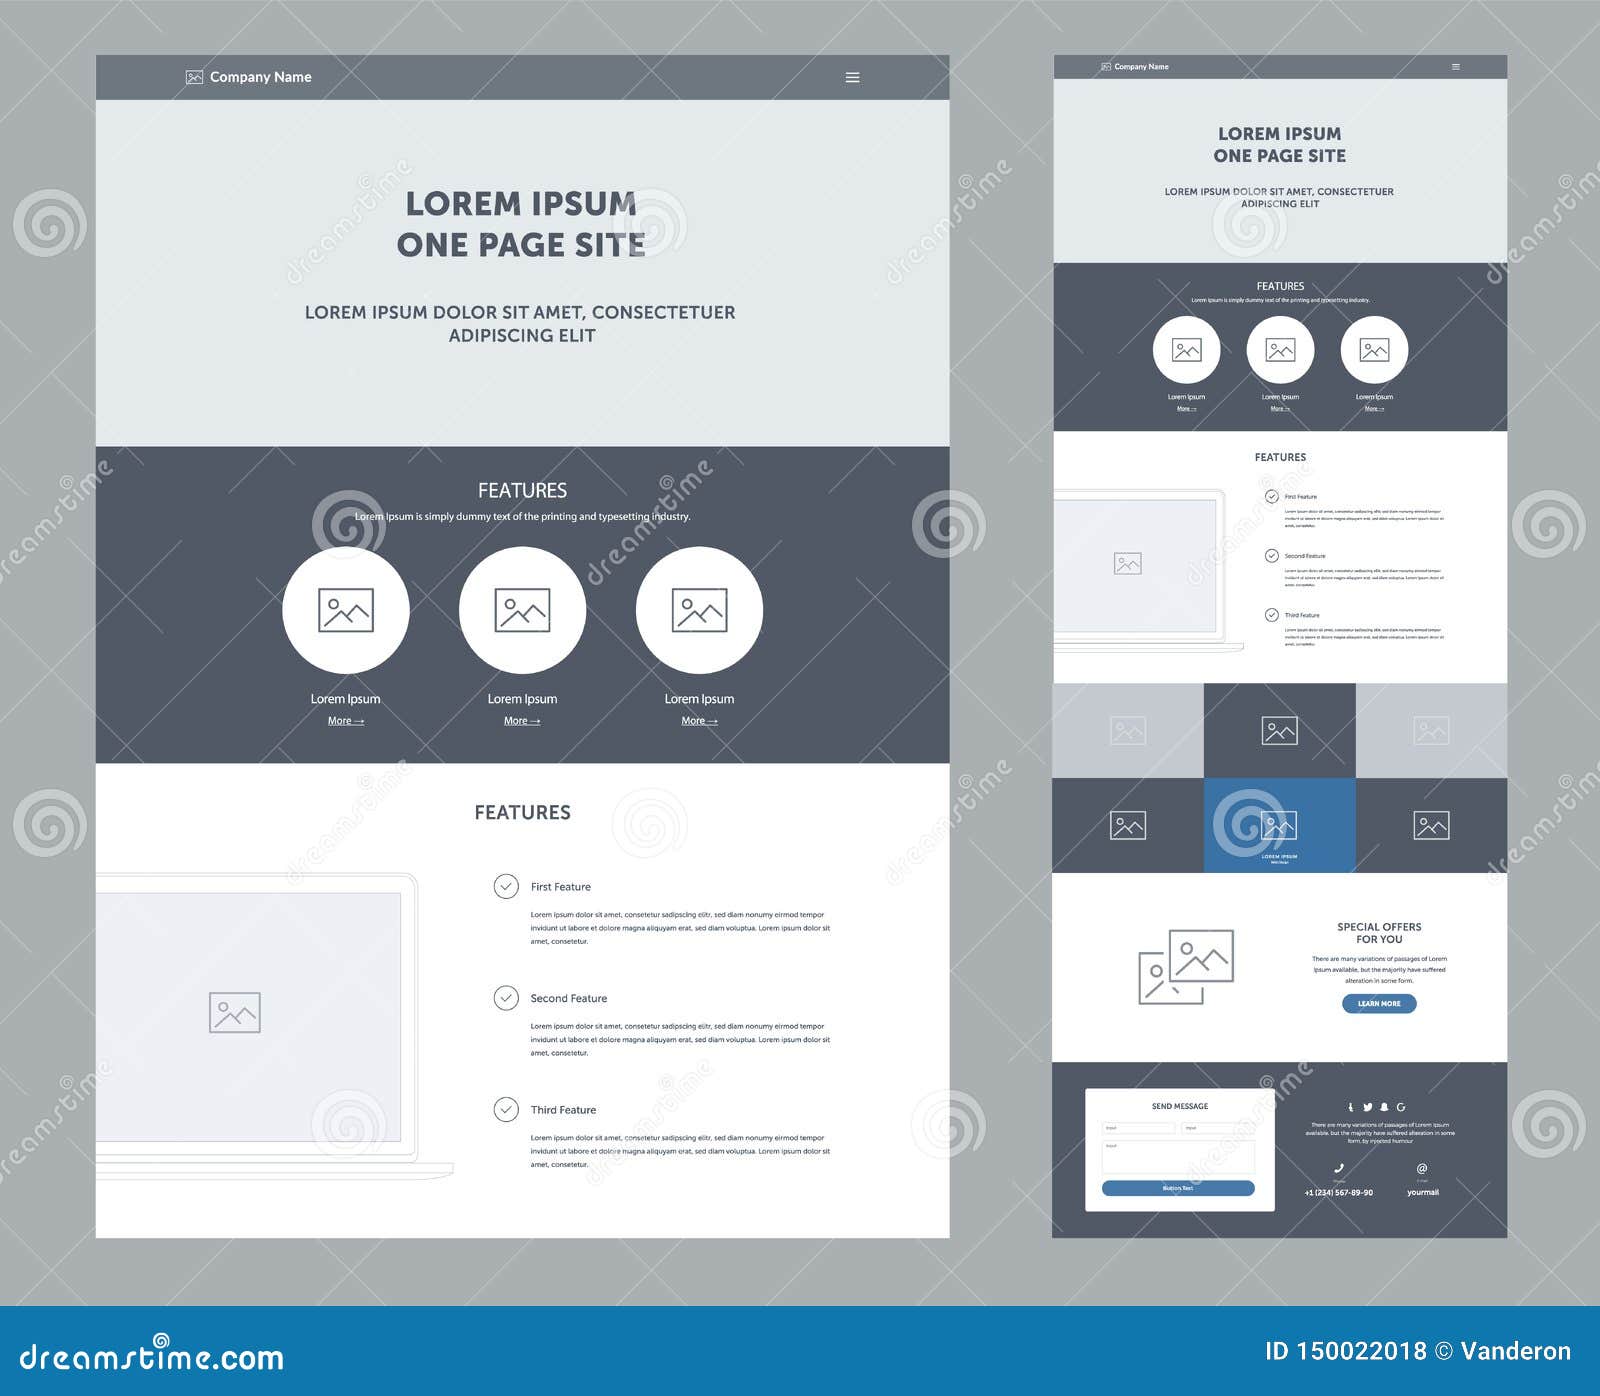 One Page Website Design Template for Business. Landing Page Within One Page Business Website Template